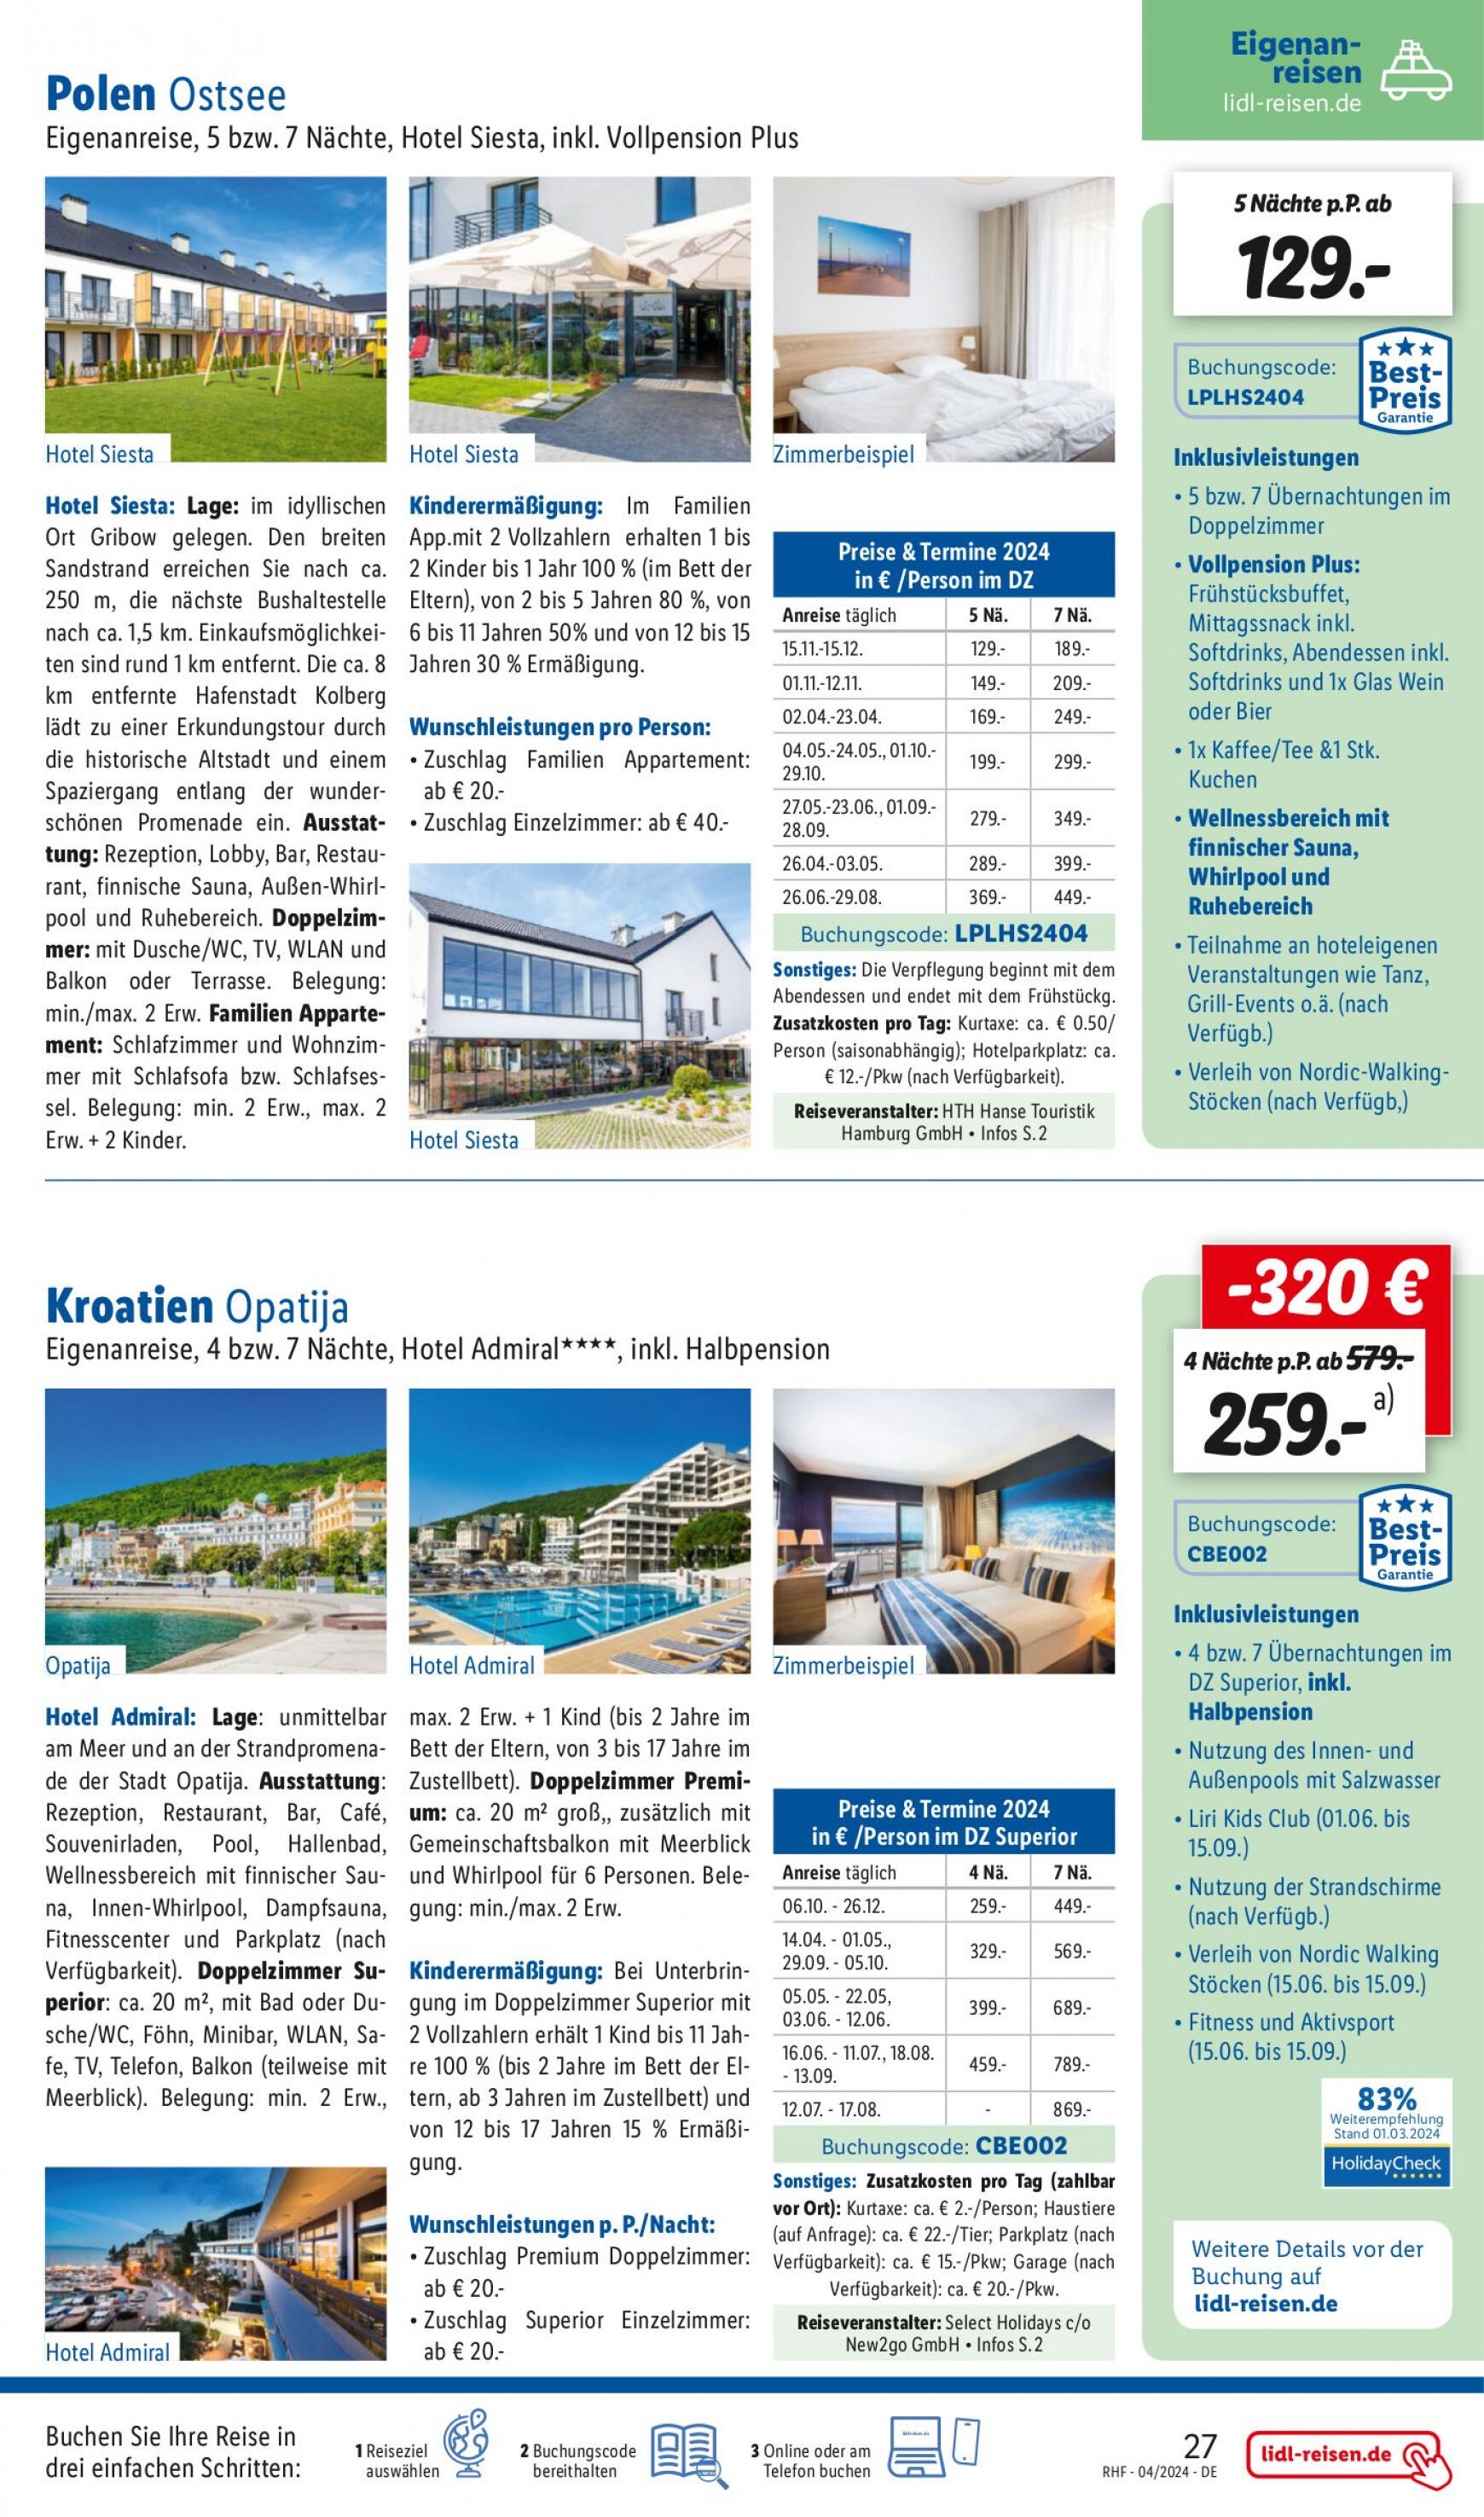 lidl - Flyer Lidl - April Reise-Highlights aktuell 27.03. - 30.04. - page: 27